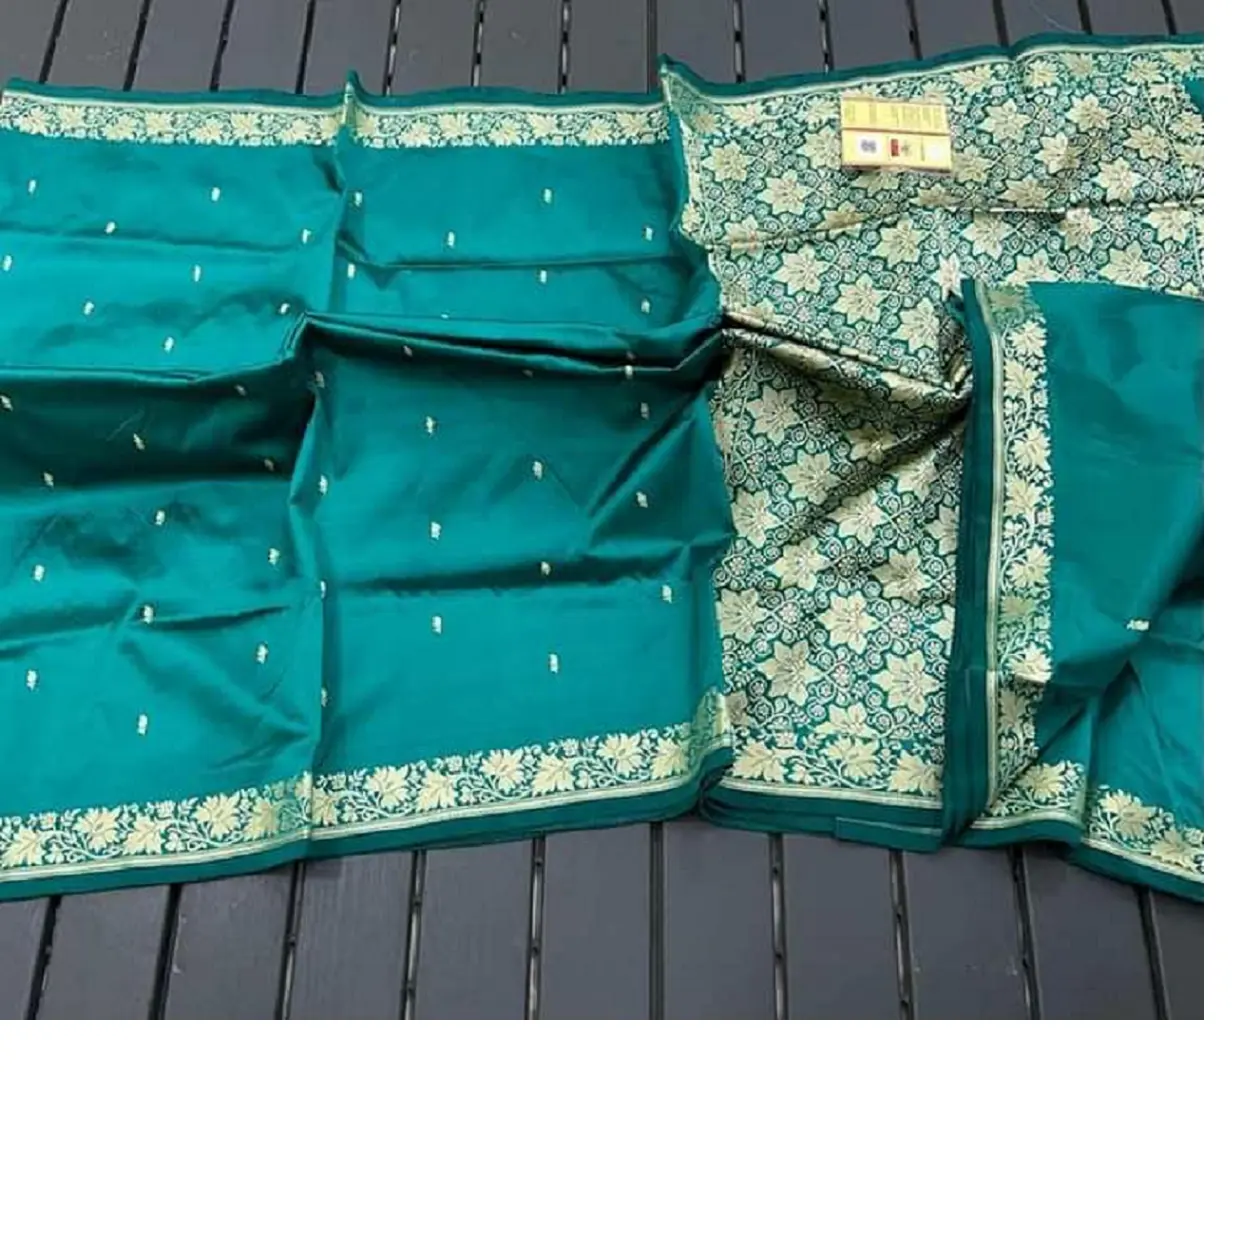 custom made brocade silk cotton sarees available in vibrant colors suitable for resale by clothing designers